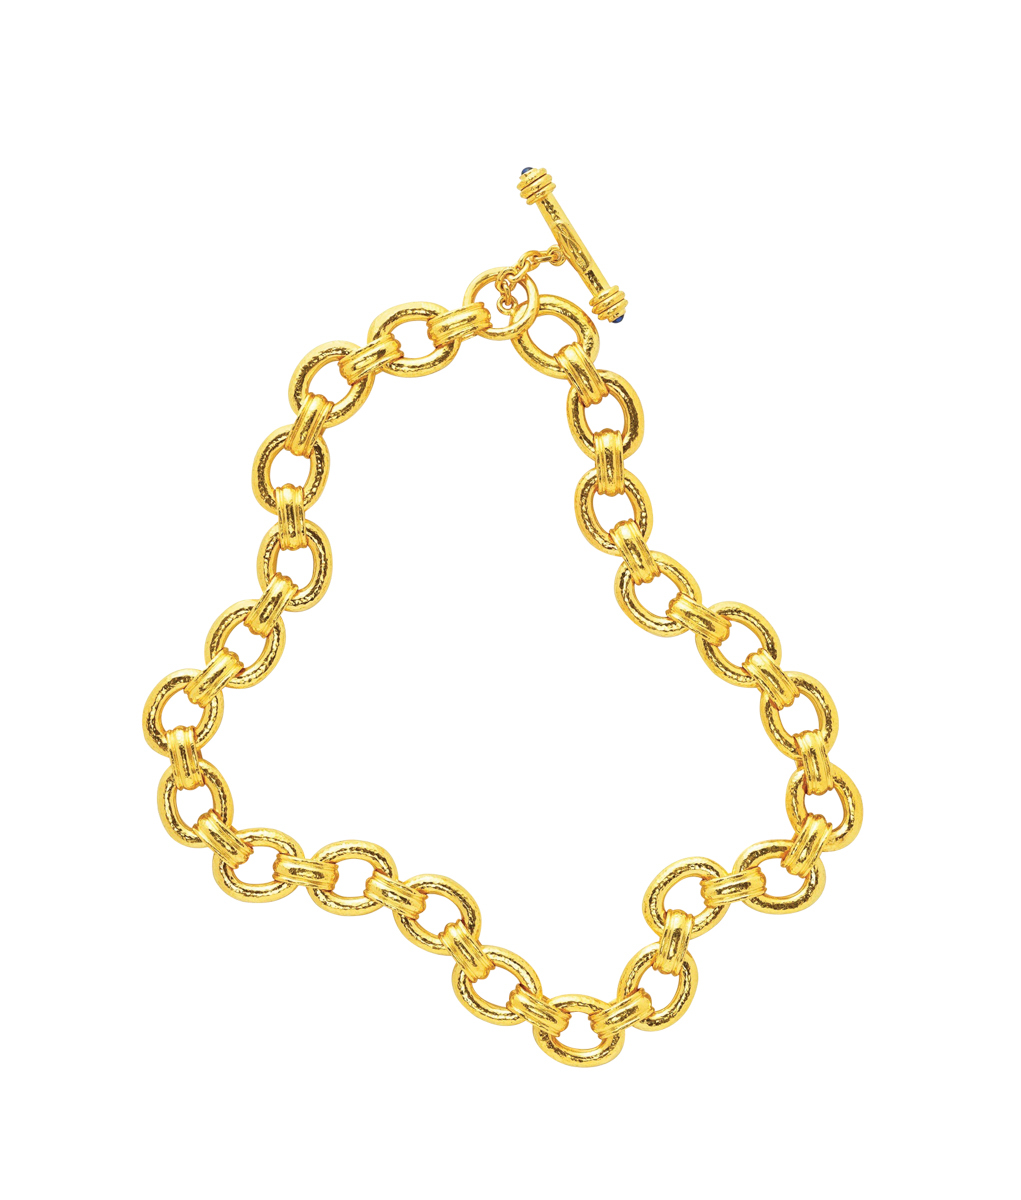 borghese link necklace